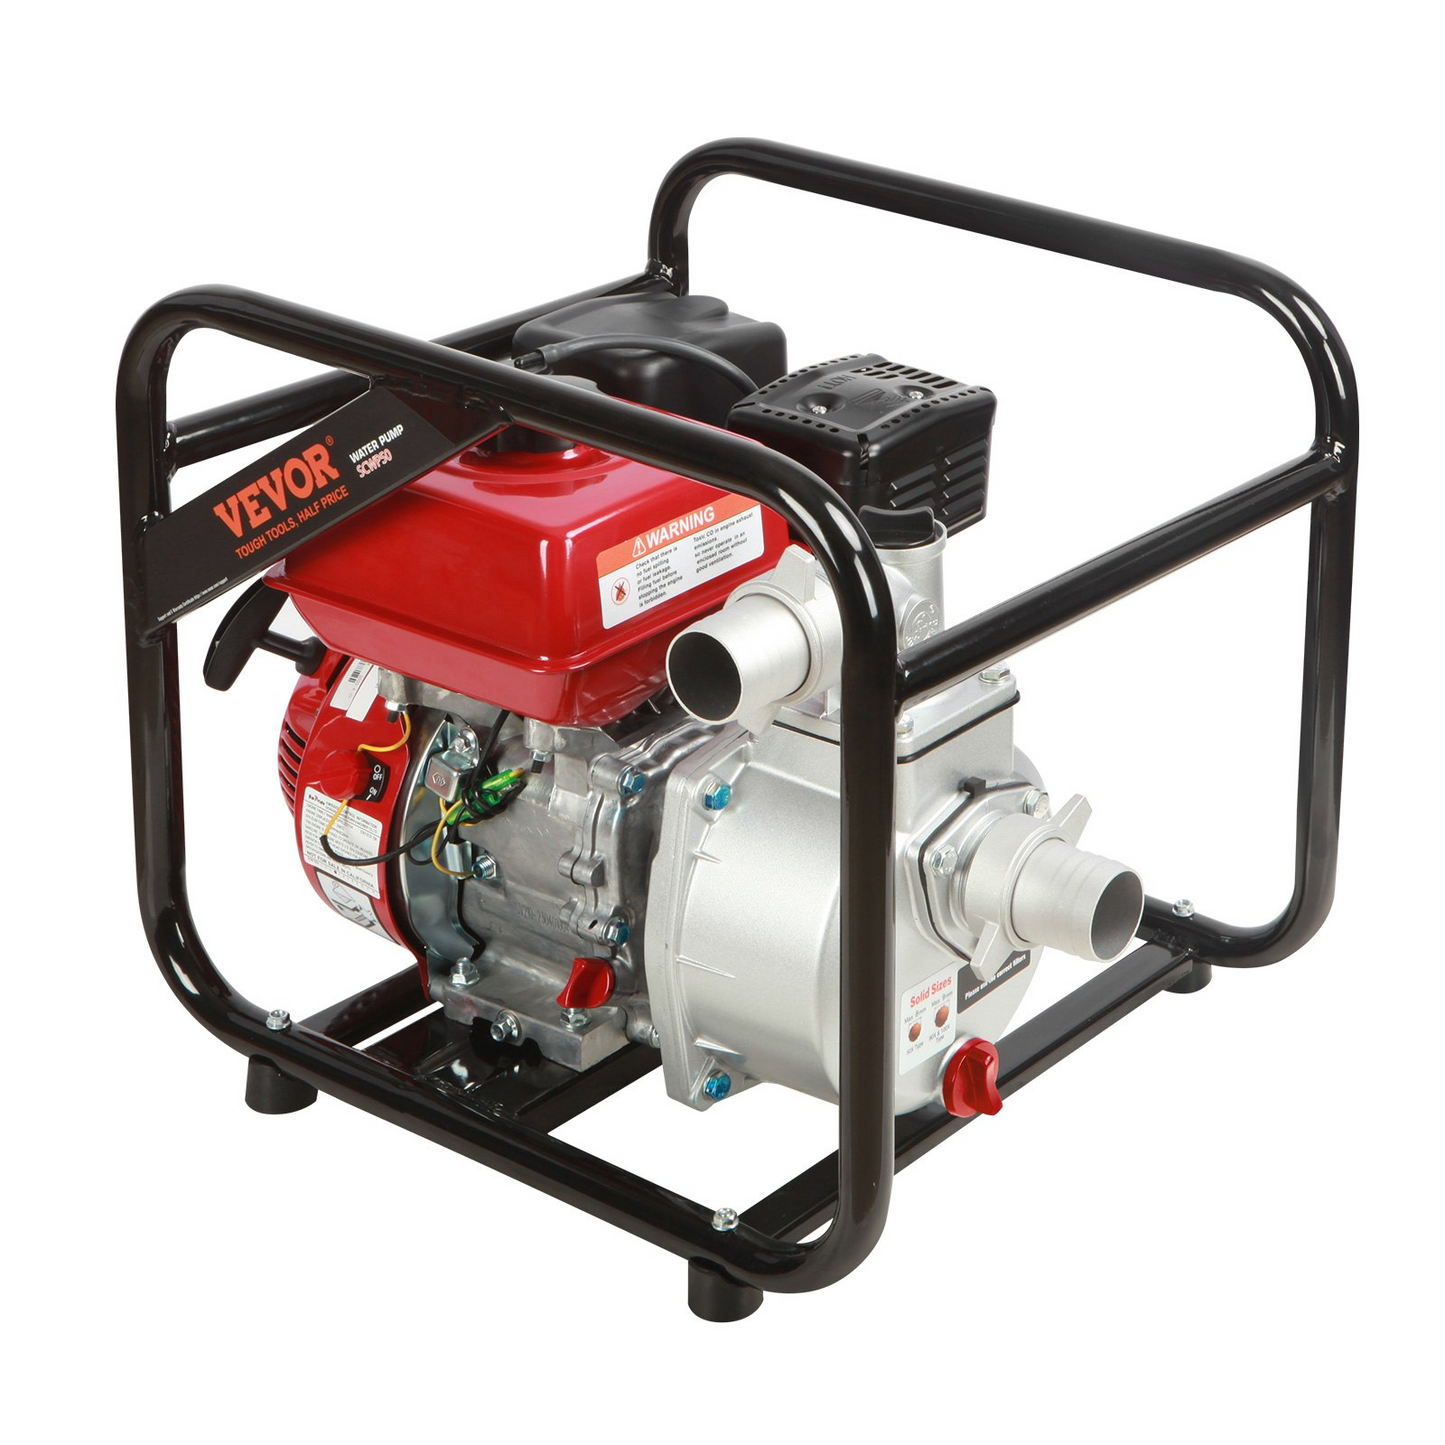 VEVOR Gasoline Engine Water Pump, 2-inch, 7HP 142 GPM, 148ft Lift, 22ft Suction, 4-Stroke Gas Powered Trash Water Transfer Pump Portable High Pressure with 25ft Hose for Irrigation Pool, EPA Certified